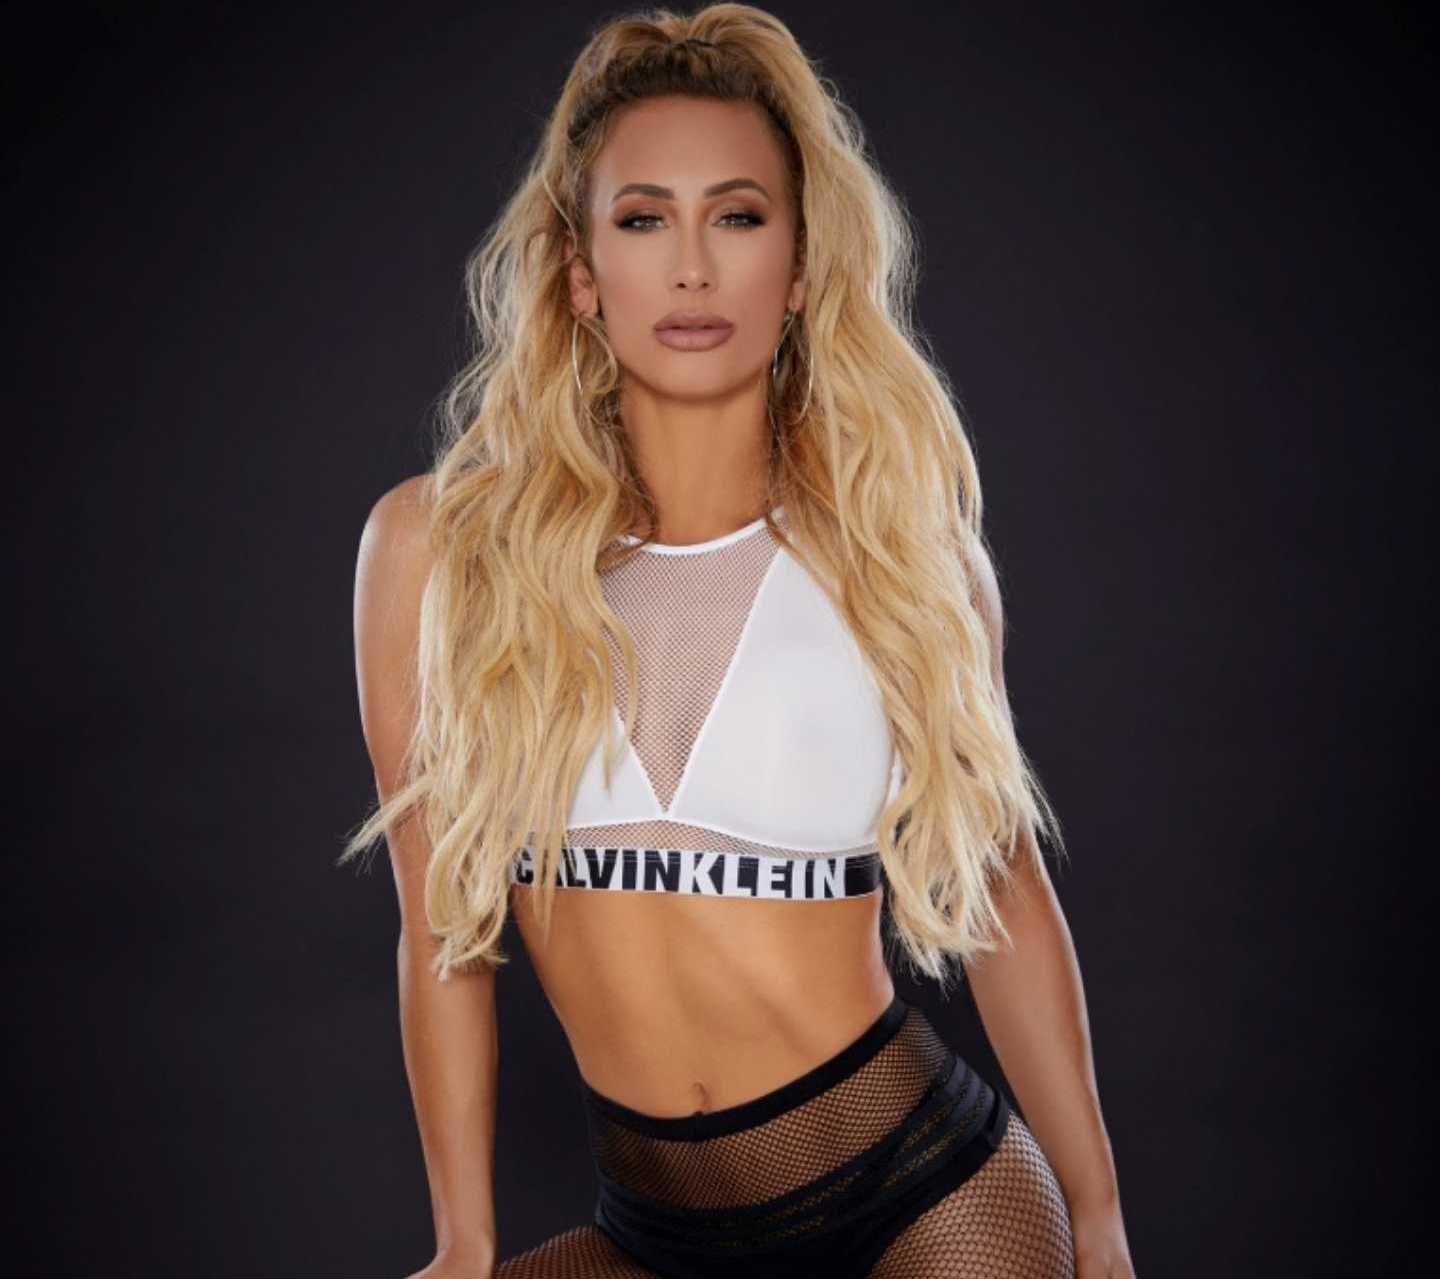 Top 10 Beautiful & Hottest WWE Diva in 2022 - Top 10 About